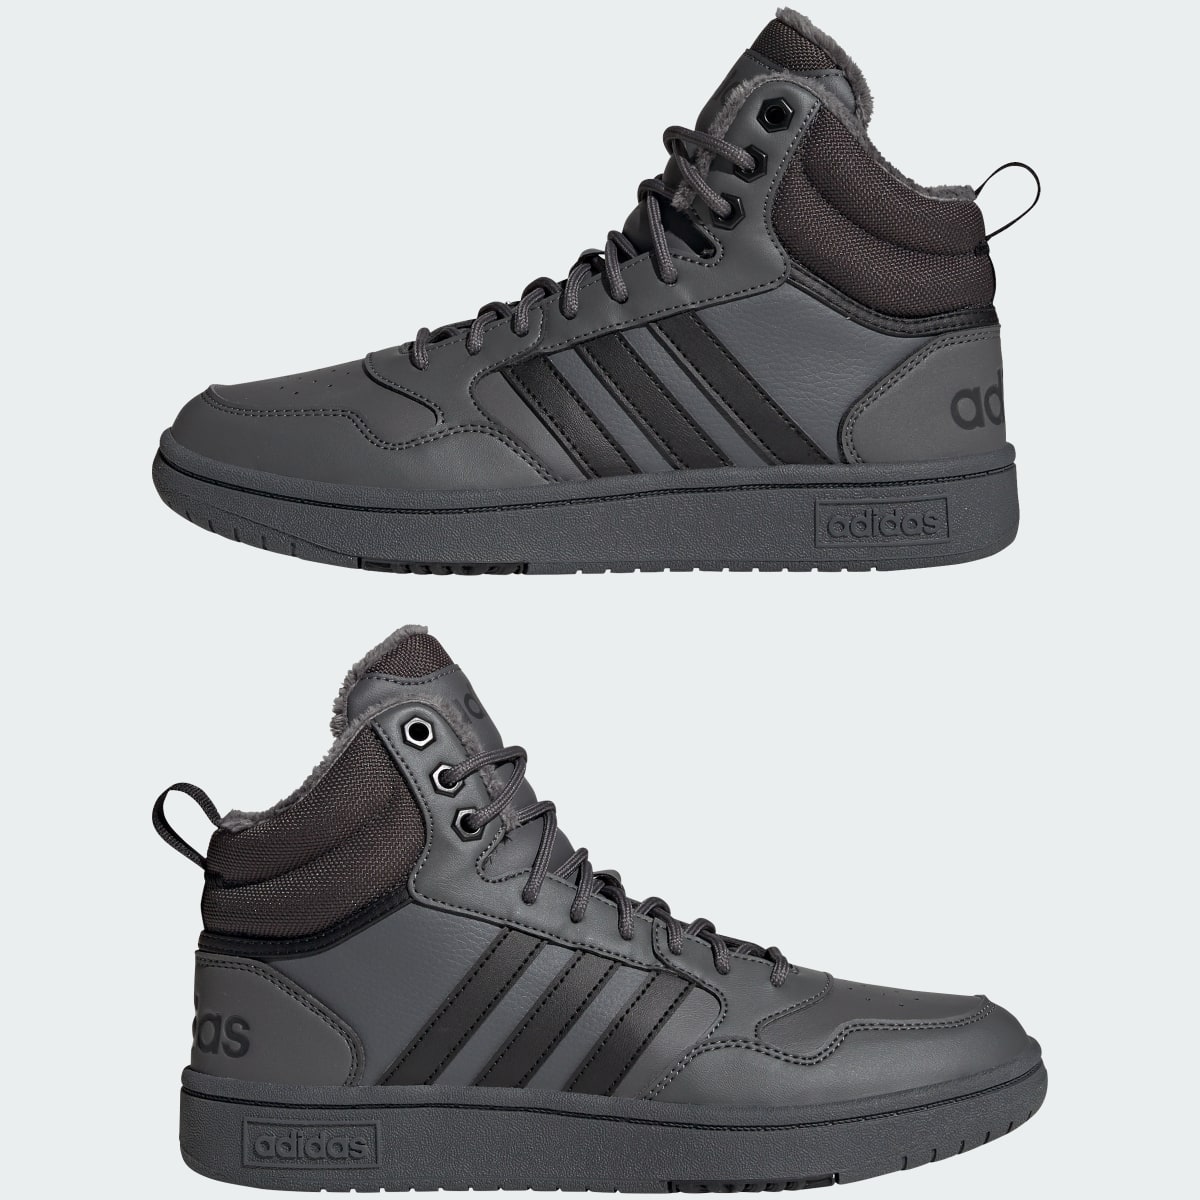 Adidas Hoops 3.0 Mid Lifestyle Basketball Classic Fur Lining Winterized Shoes. 8